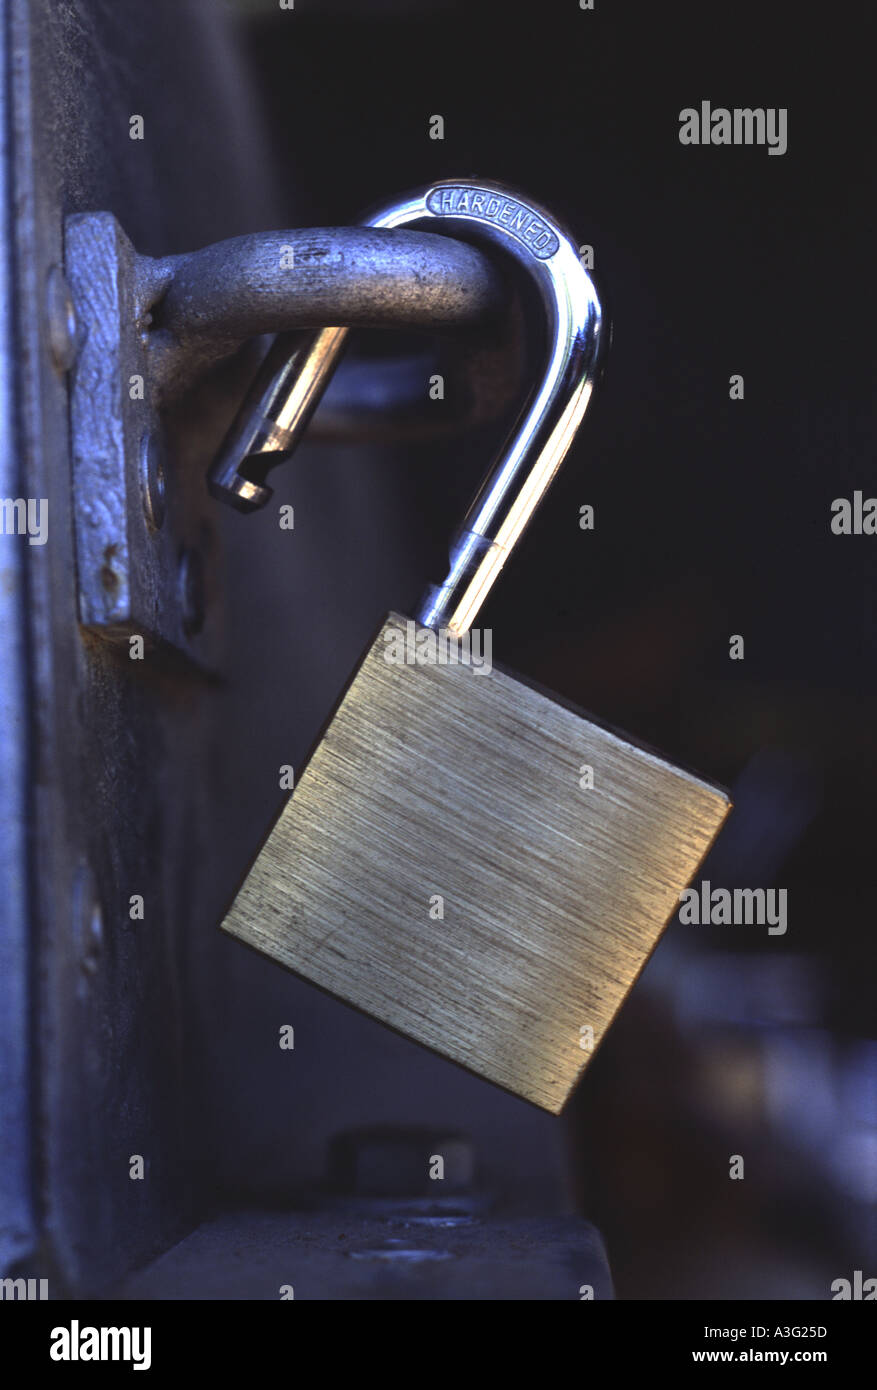 open padlock resting in hasp and staple brass bodu and steel latch Stock Photo